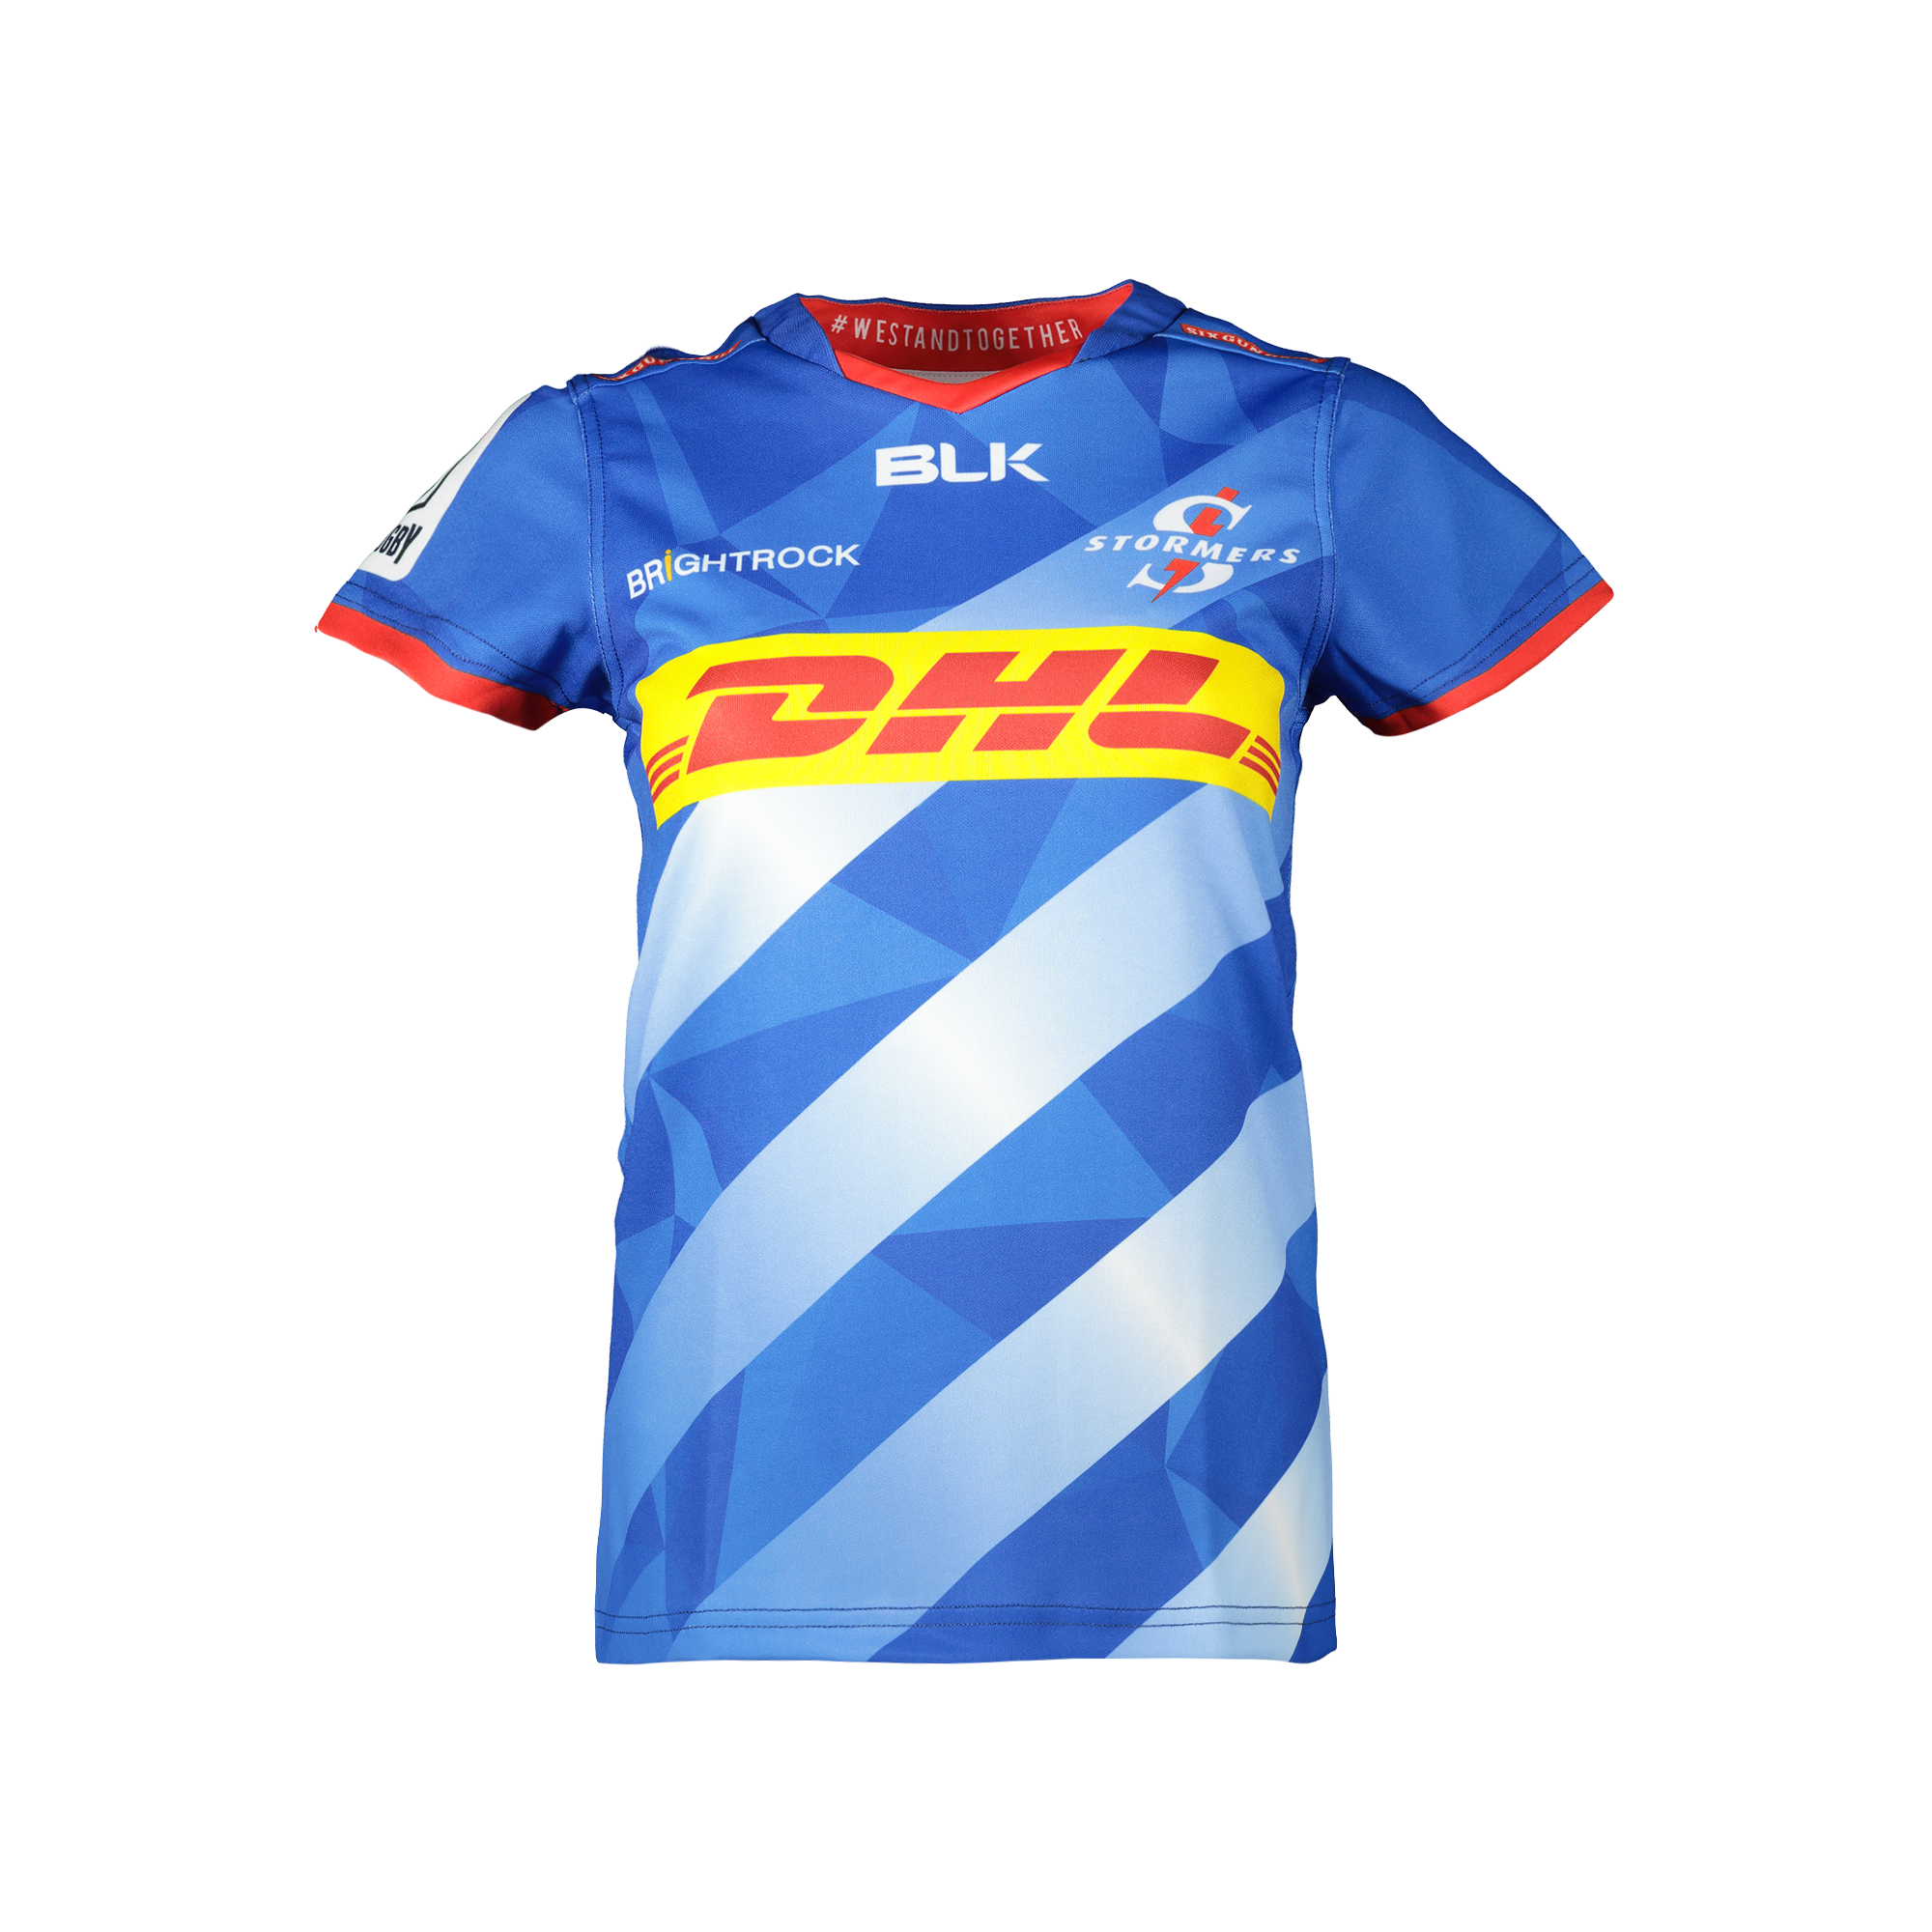 Jersey Ladies Stormers Super Rugby 2020 Home Blue - Official Merchandise